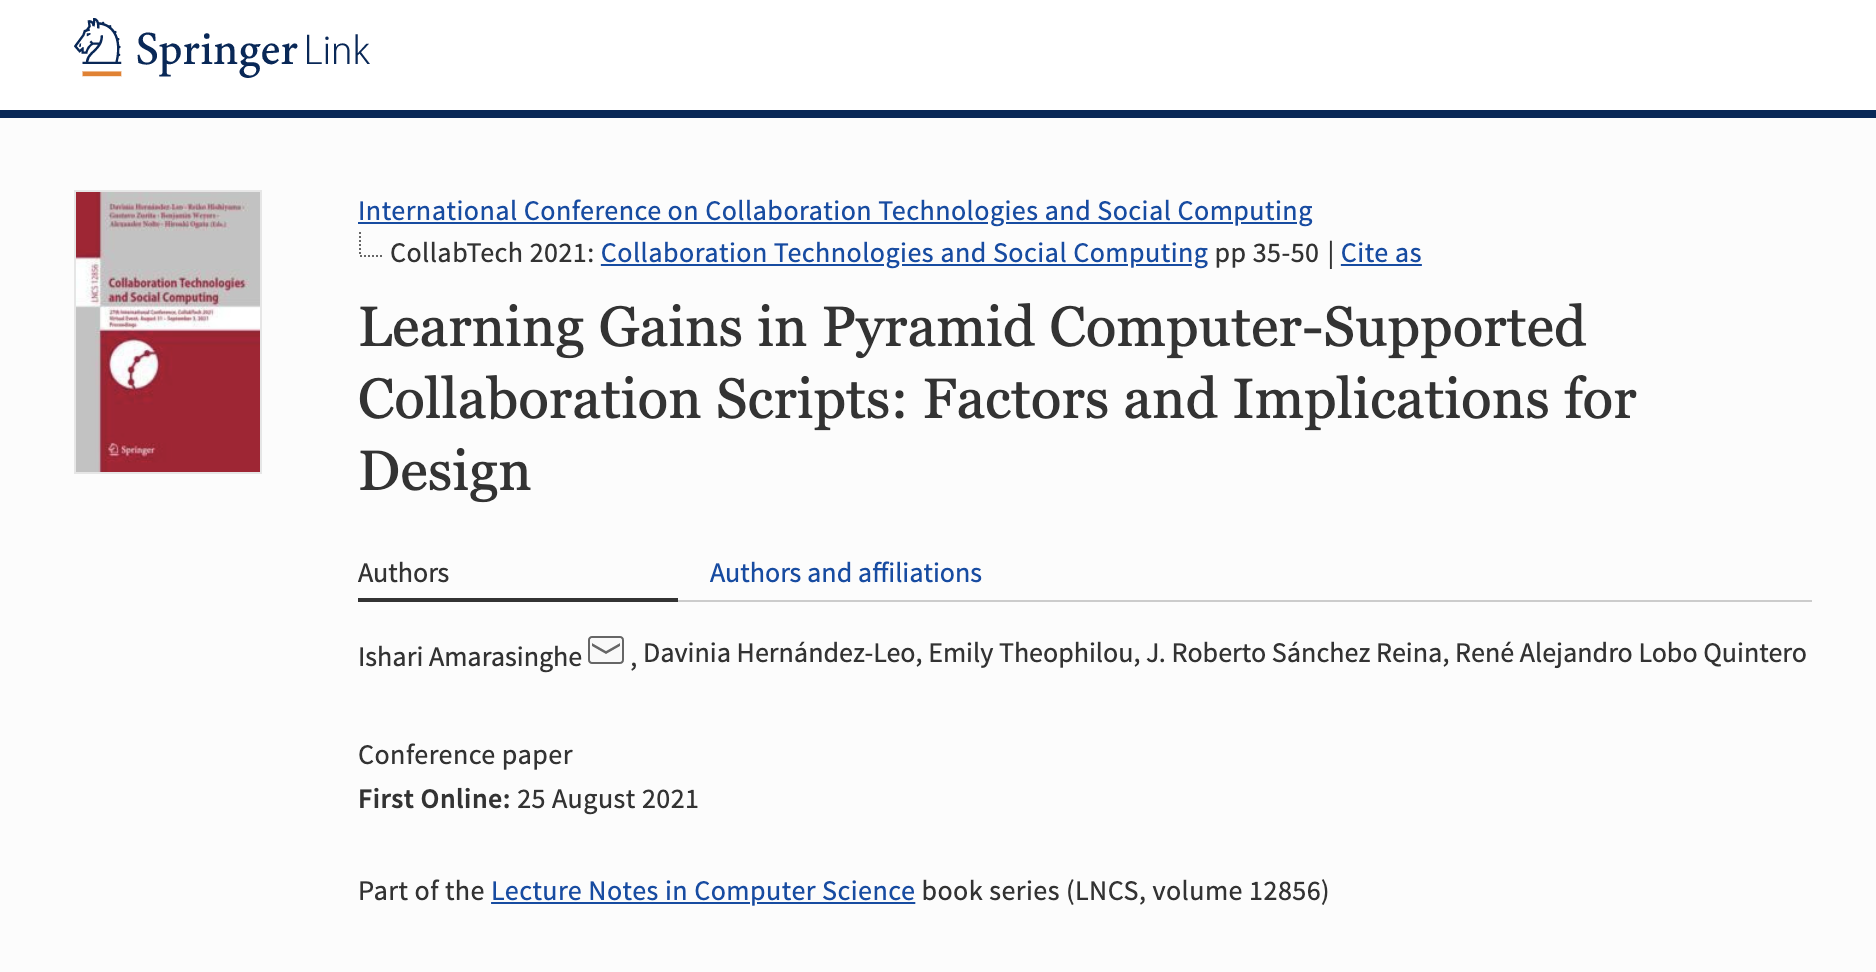 CollabTech2021 paper:  Learning gains in Pyramid computer-supported collaboration scripts: factors and implications for design